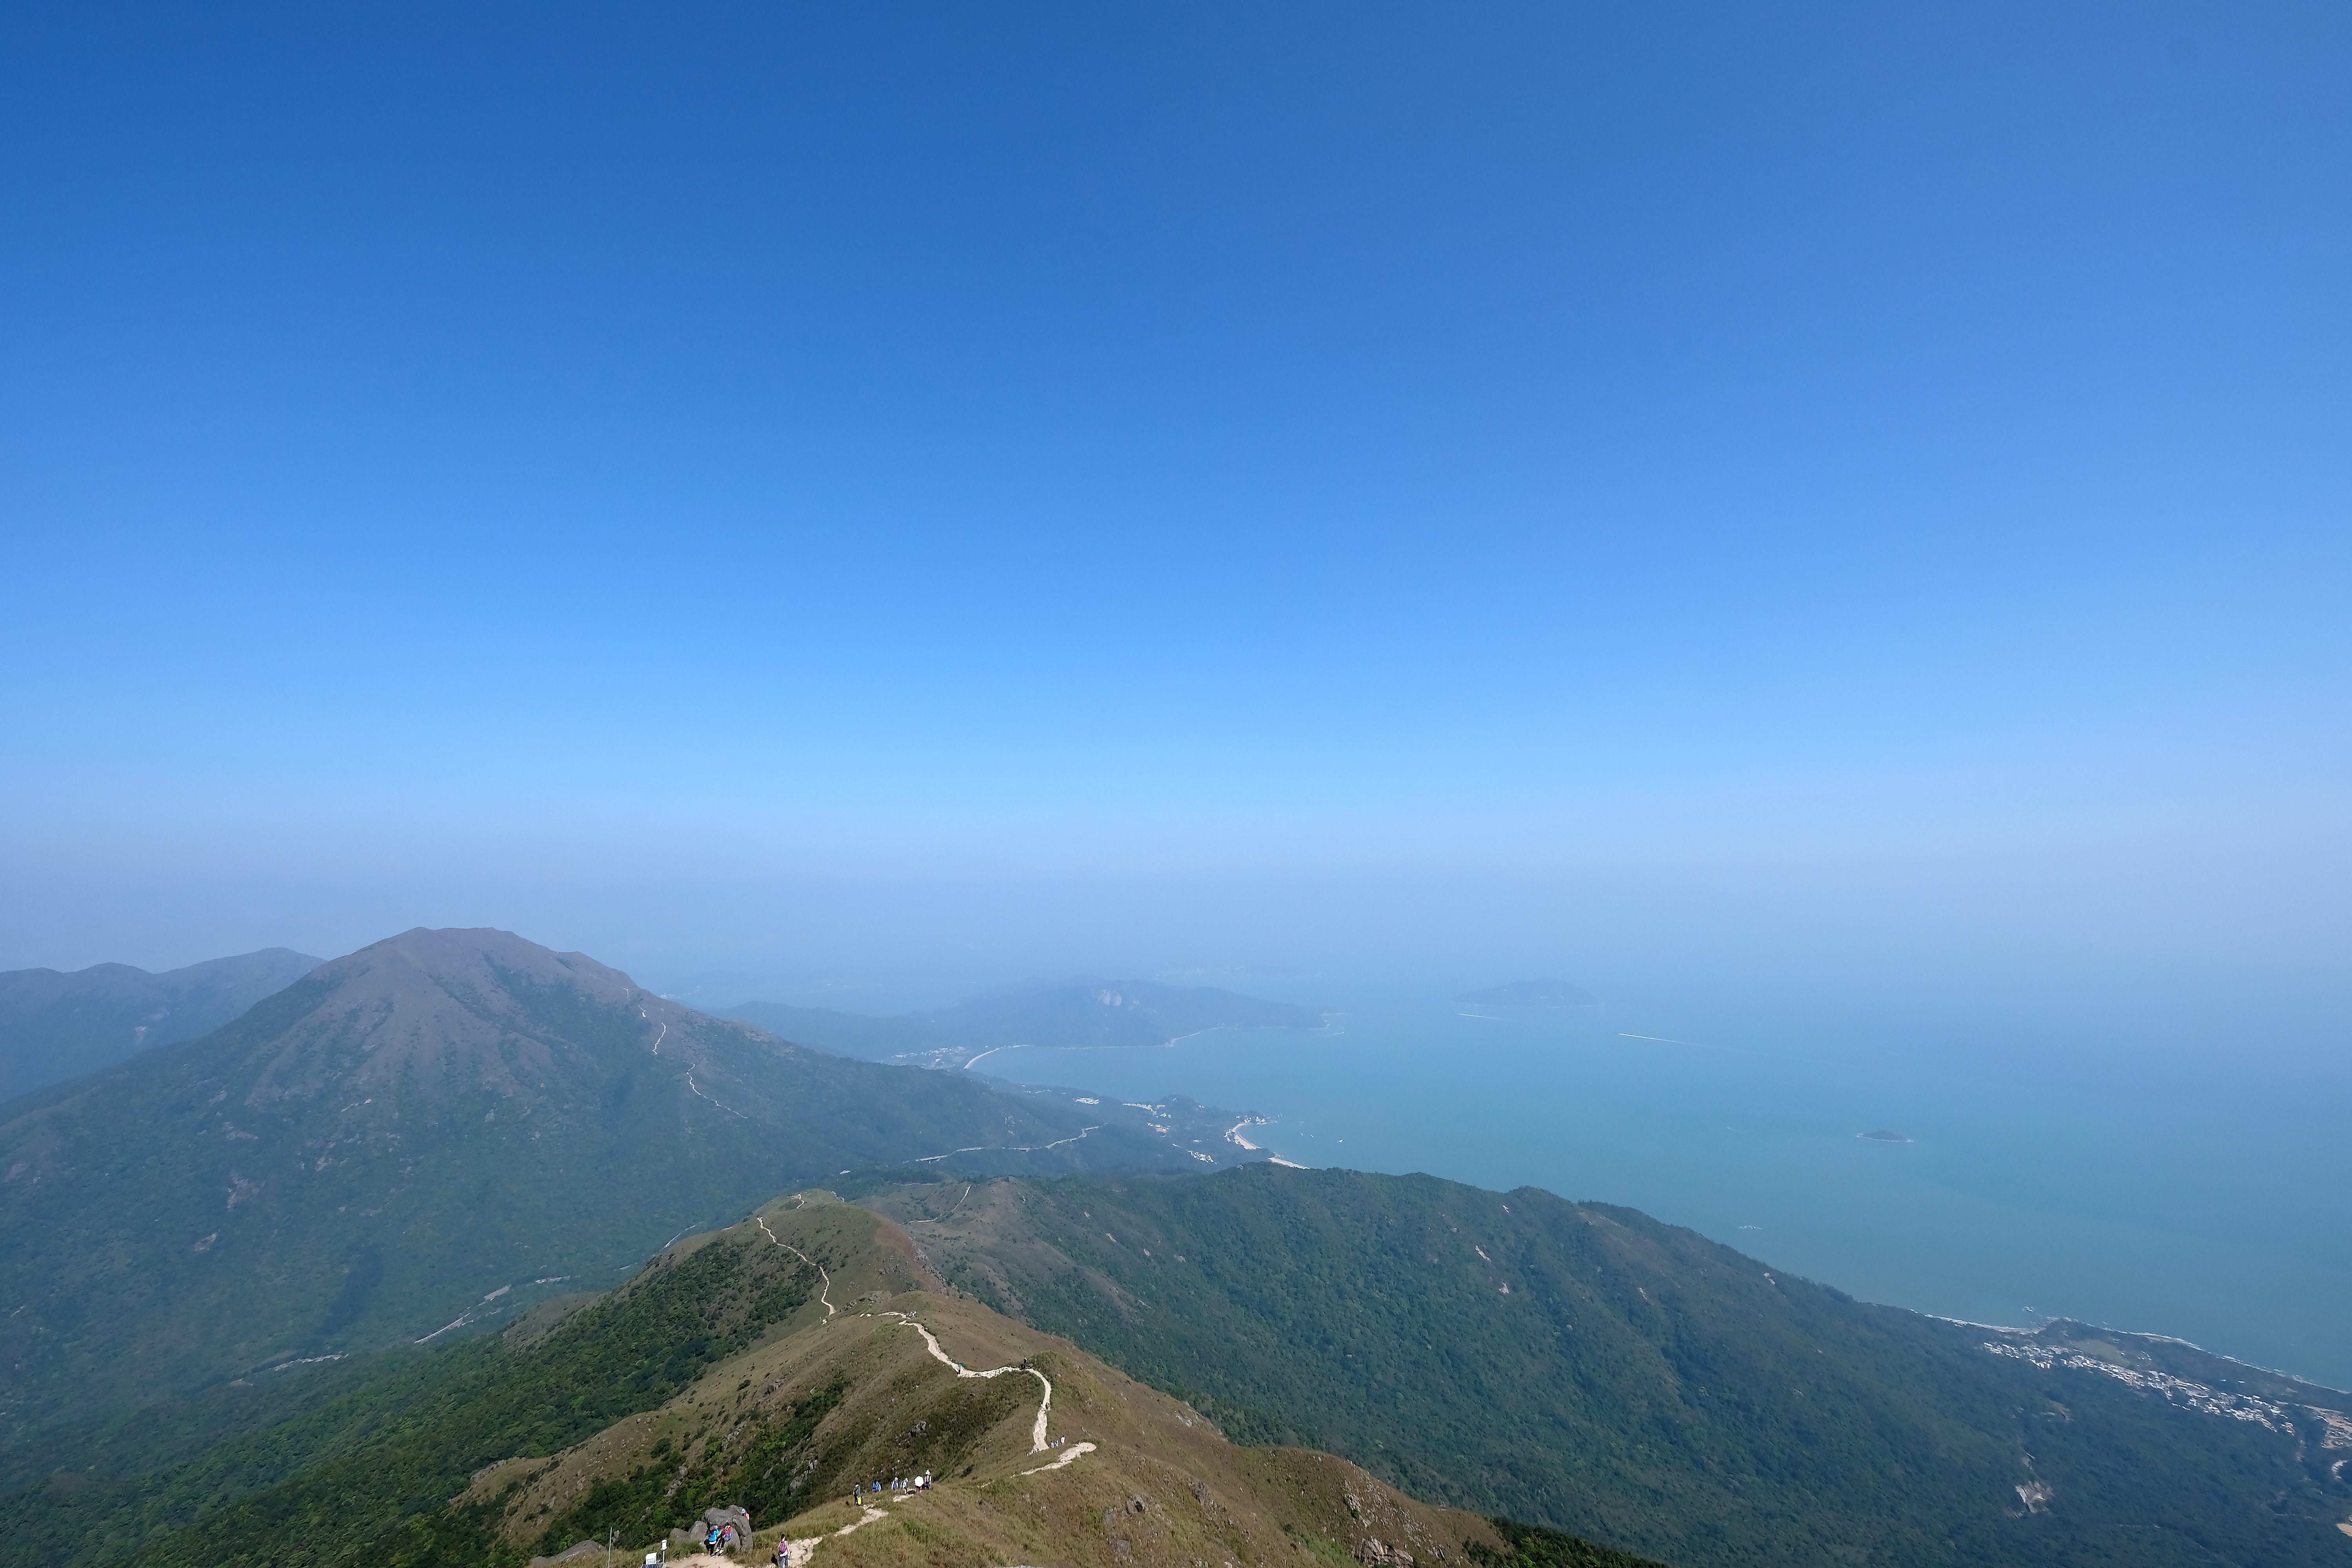 Lantau Island, with its hiking trails and rich biodiversity, is the last frontier of greenery for a city with a relentless thirst for land. Photo: Stanley Shin